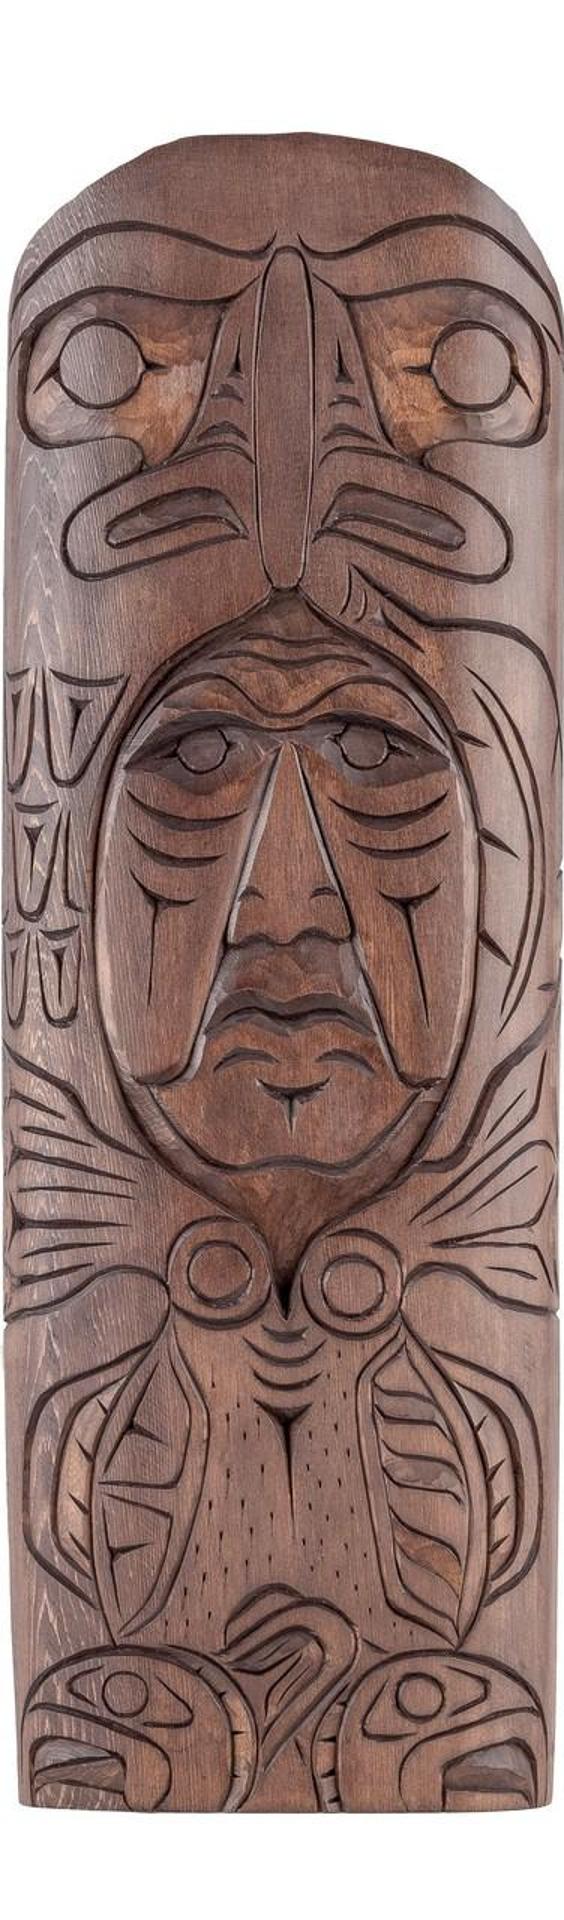 Art Harry - a carved and stained cedar plaque